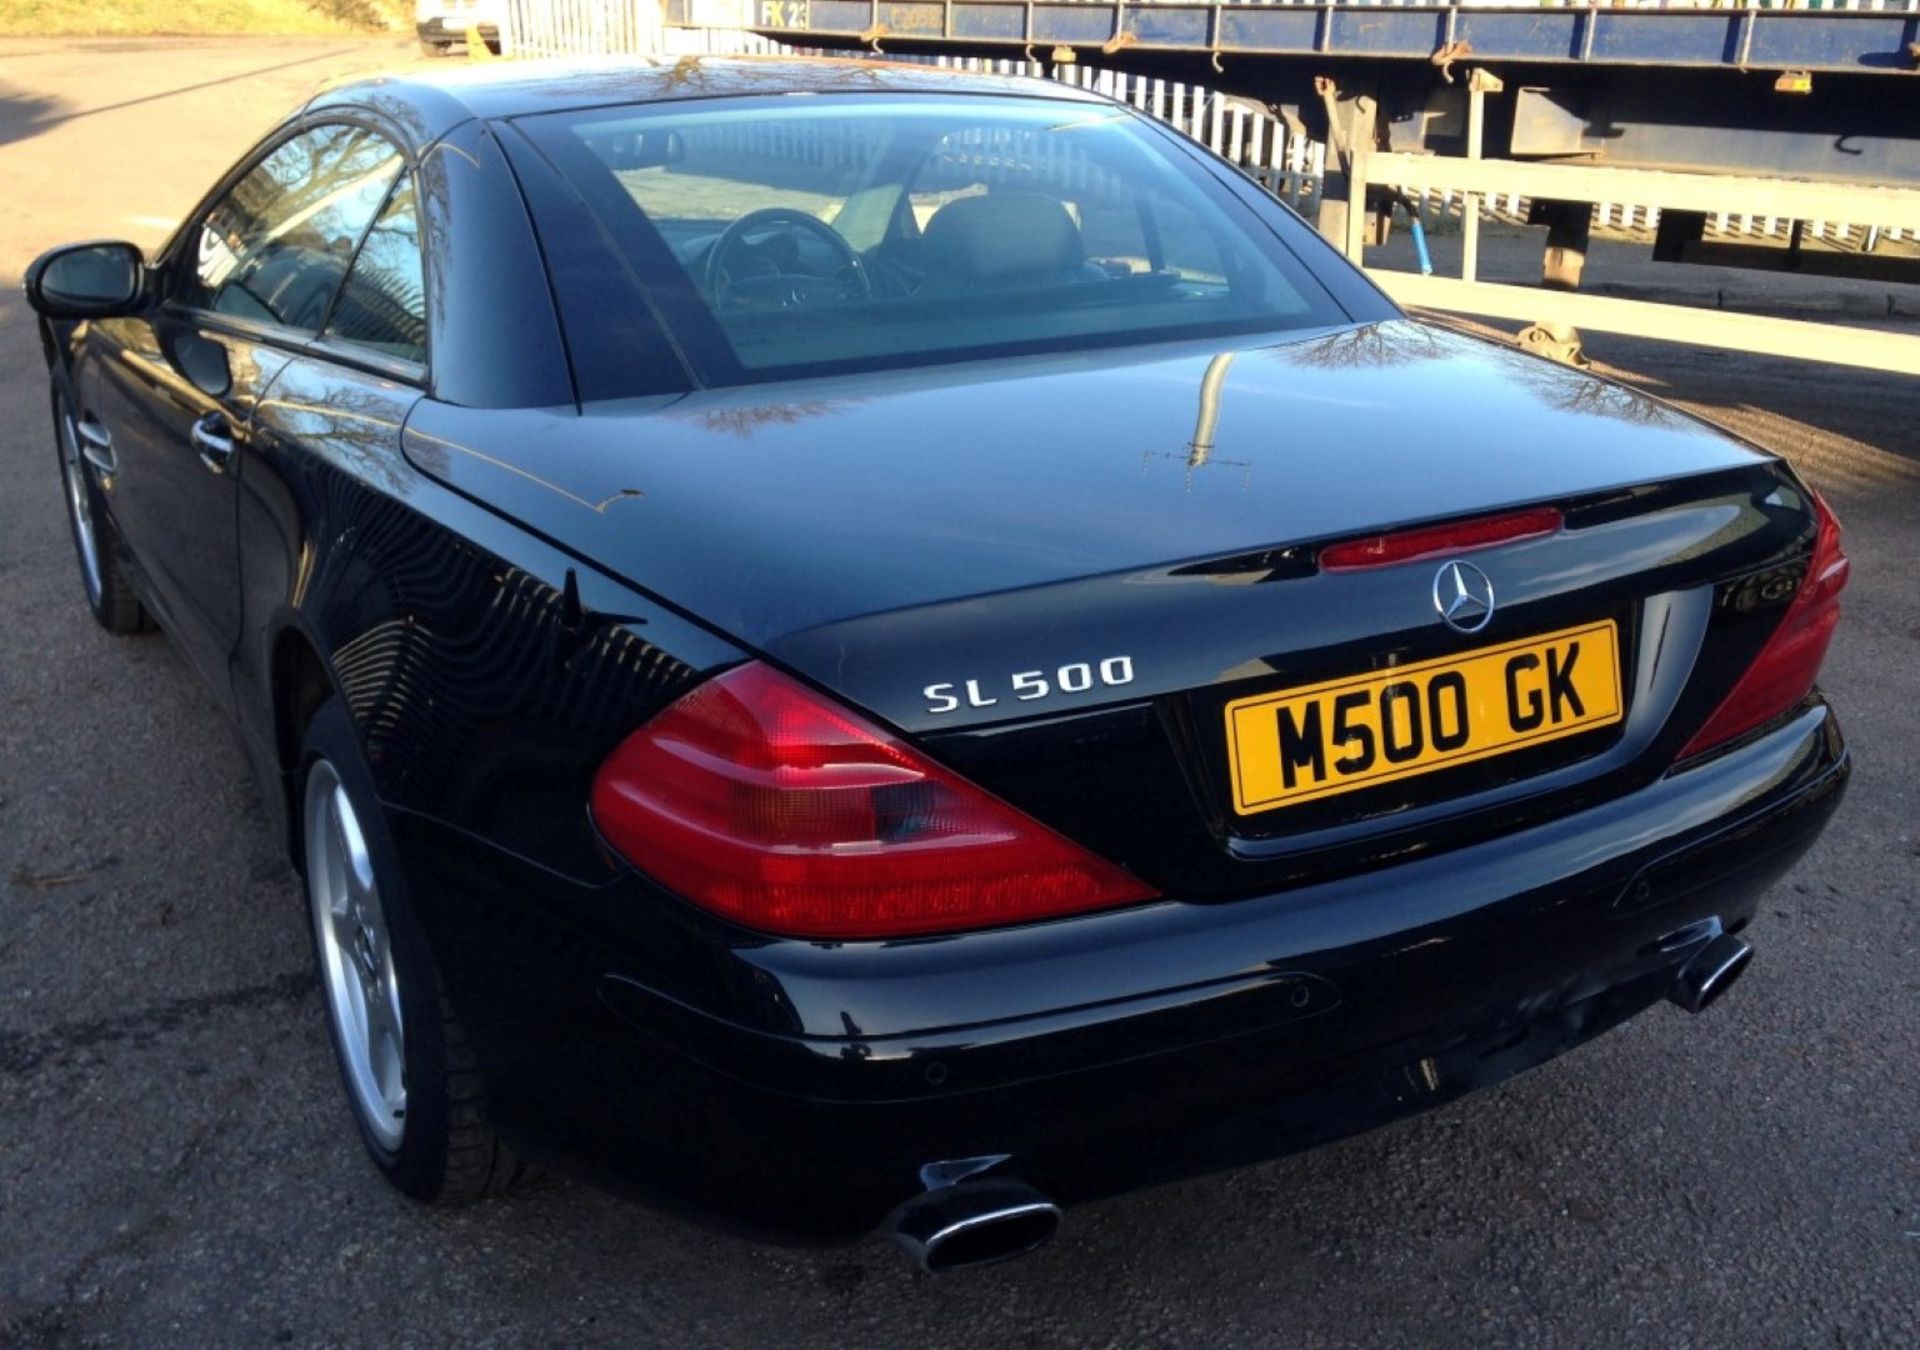 1 x Mercedes SL500 Automatic 5.0 Convertible - Petrol - Year 2002 - 94,500 Miles - Long MOT Expiry - Image 4 of 40